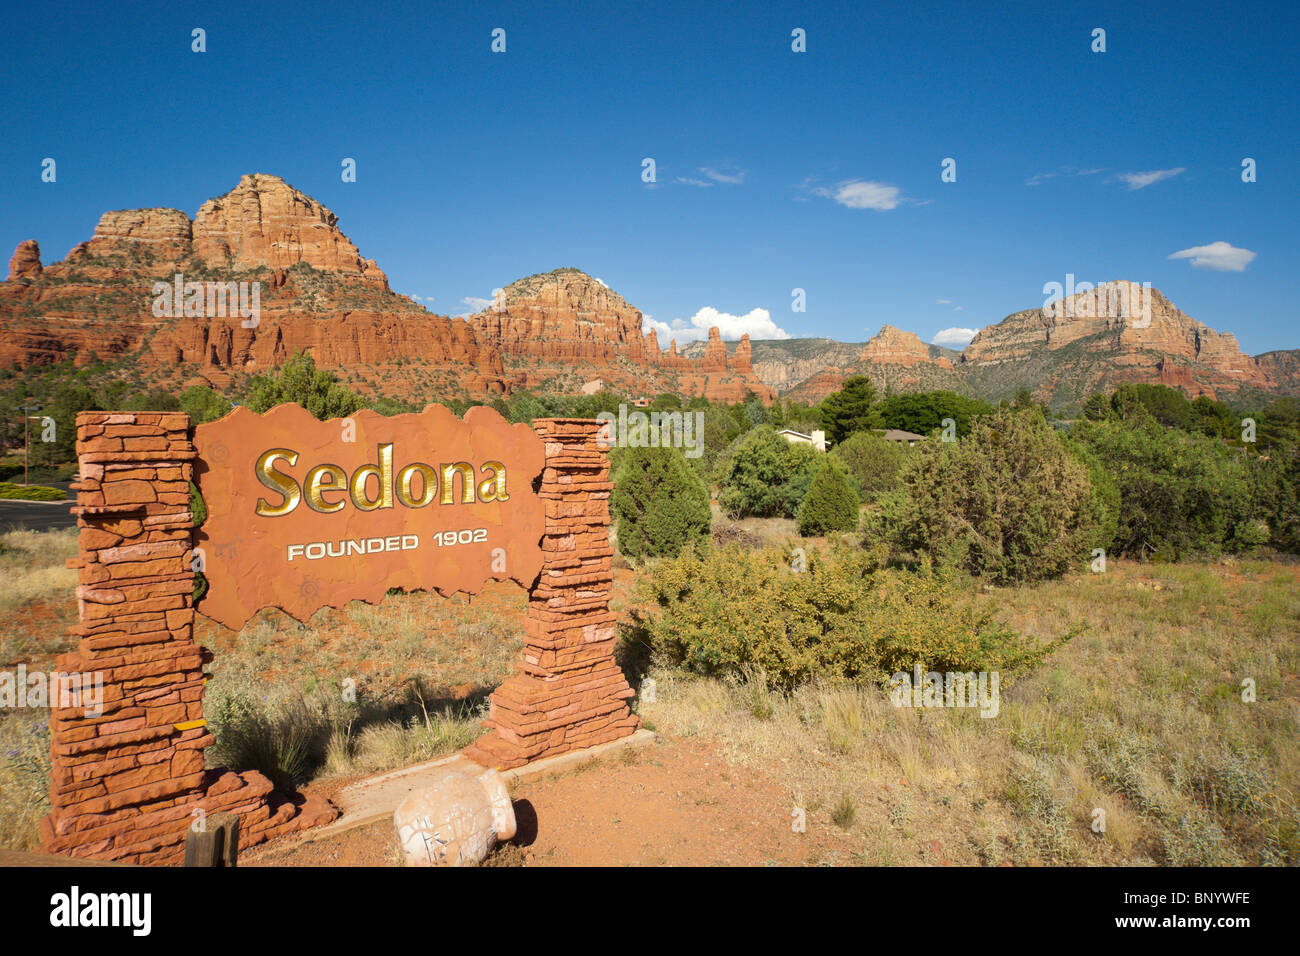 Sedona, Arizona - Sedona City limits sign entering from south on 179, welcome, founded 1902, with red rock vista. Stock Photo